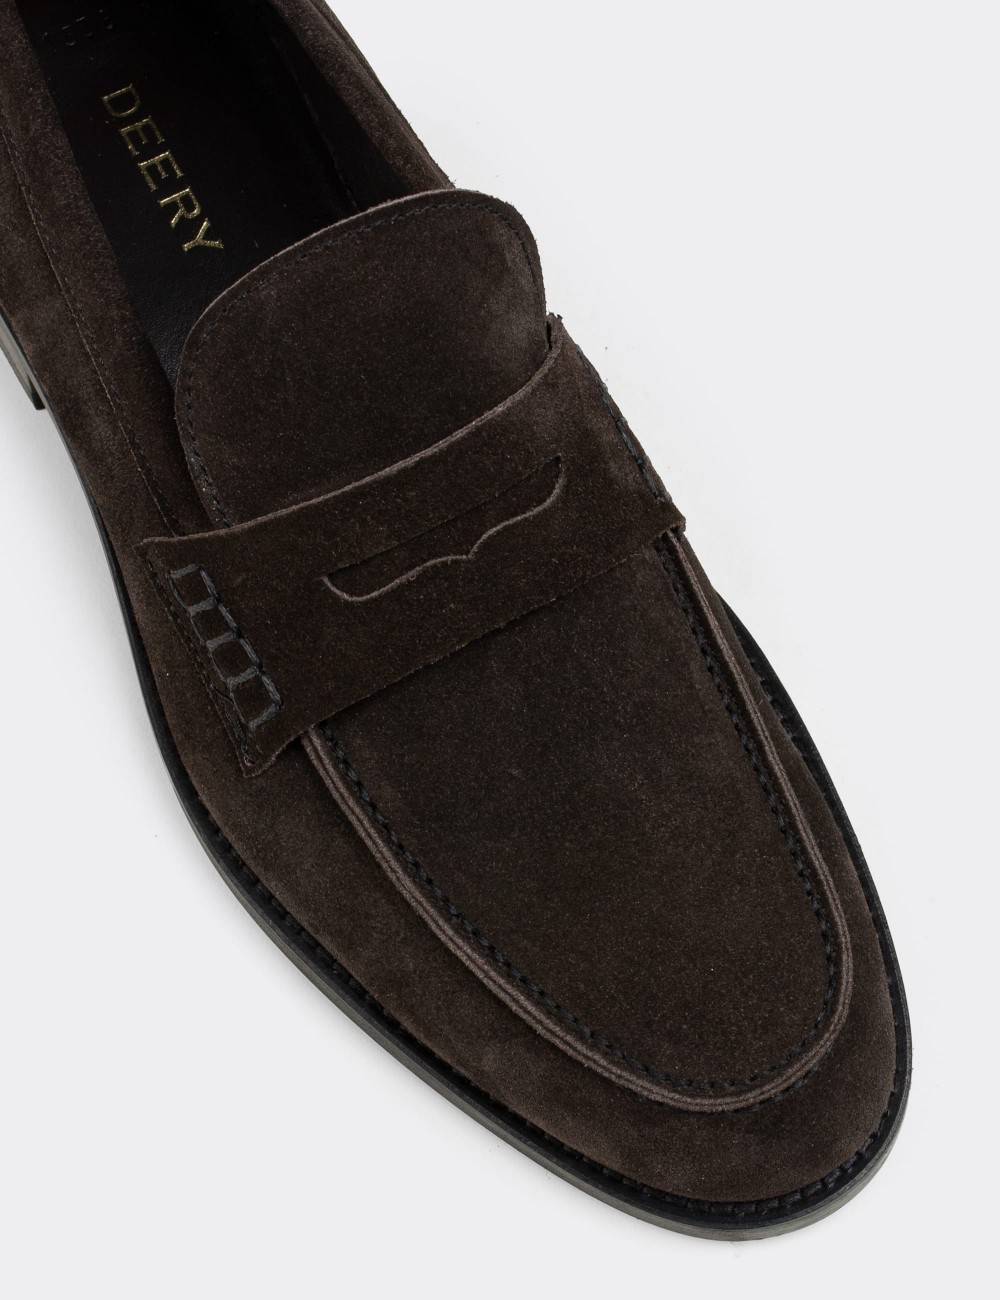 Brown Suede Leather Loafers - 01538MKHVN08